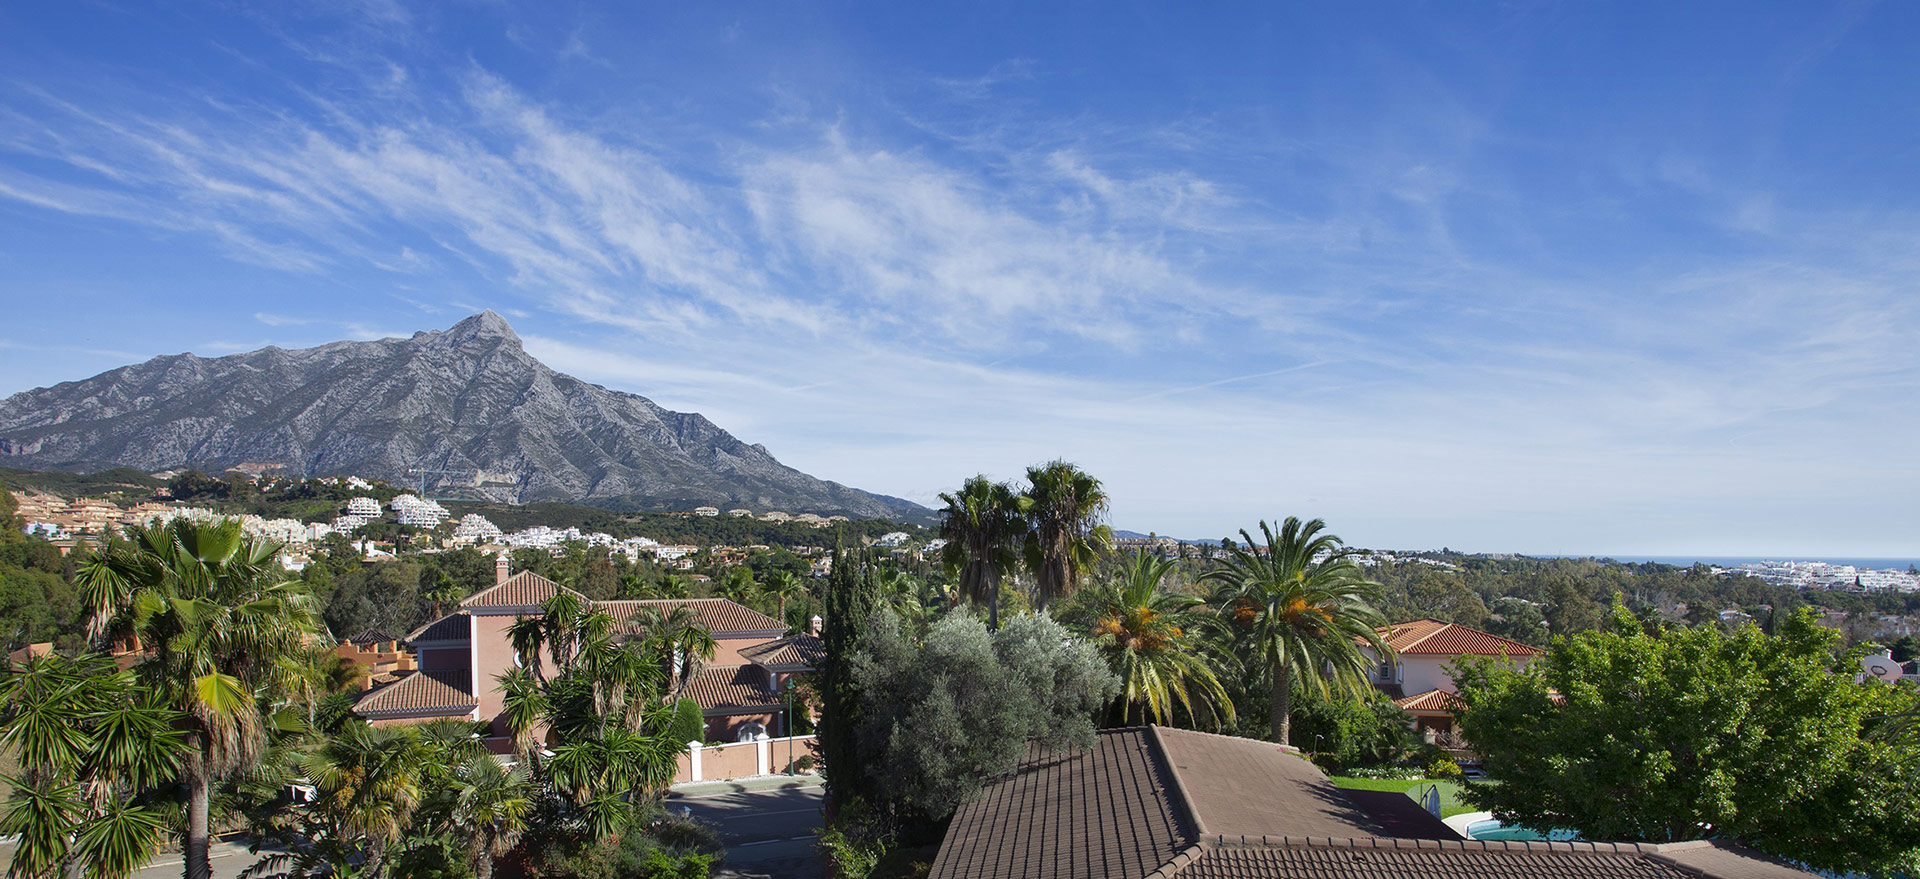 New growth areas in Marbella